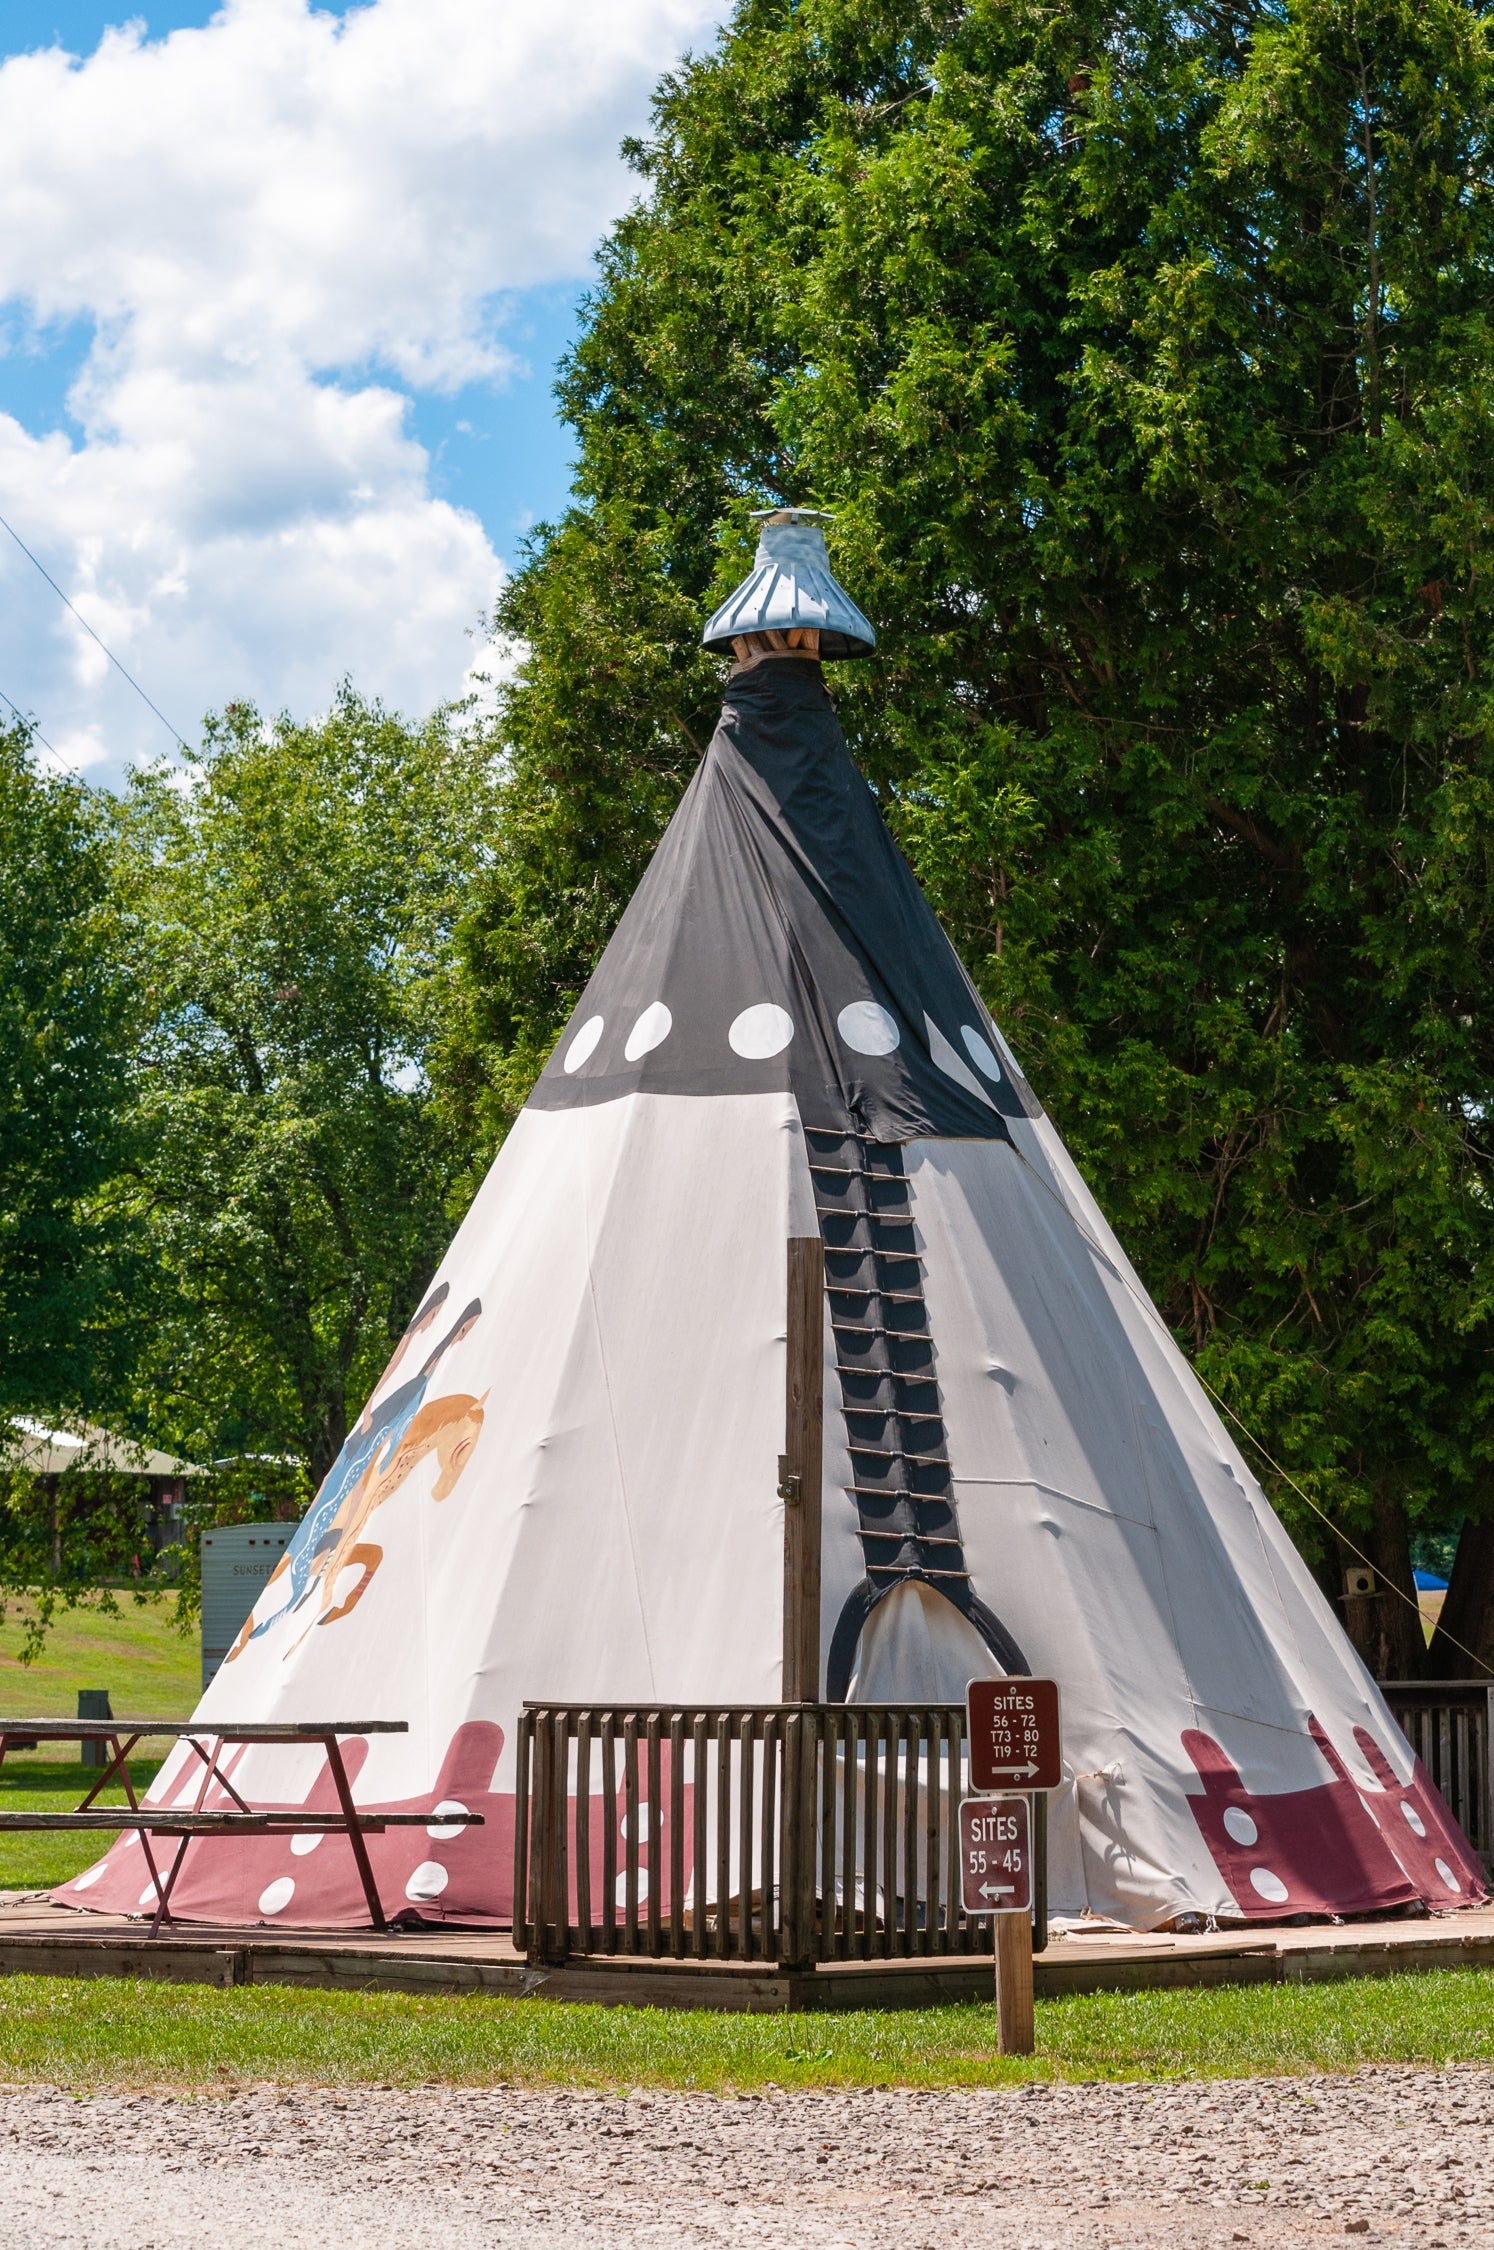 Can even rent a teepee at the park.